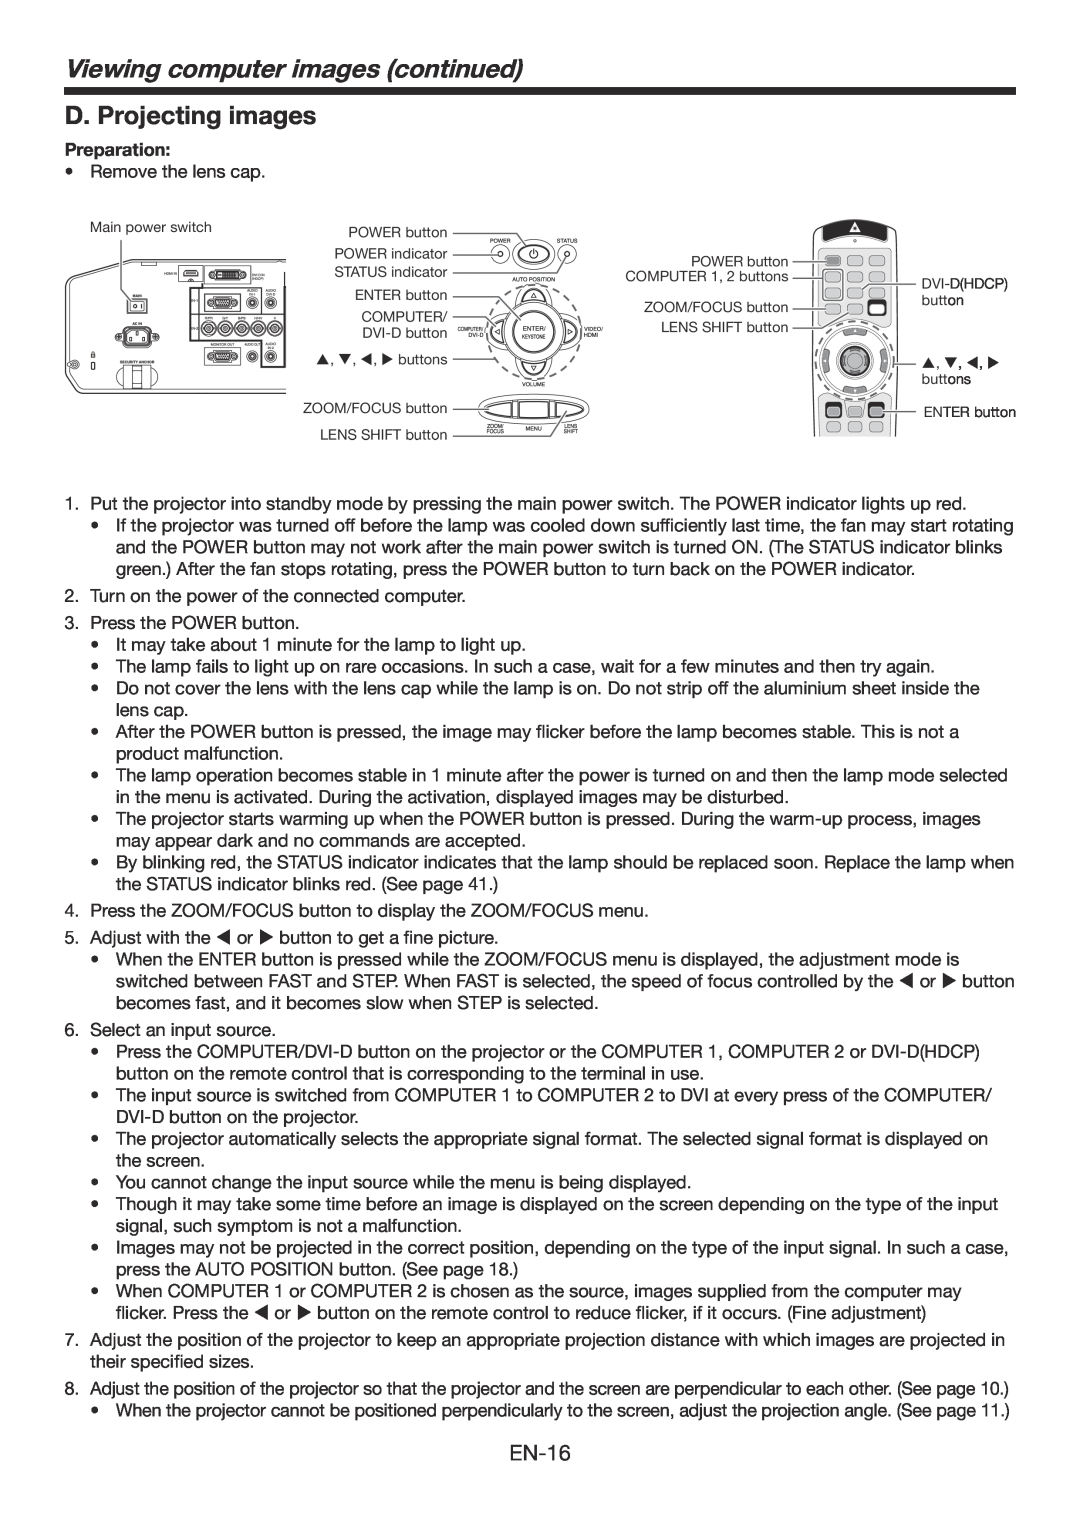 Mitsumi electronic WD3300U user manual D. Projecting images, Viewing computer images continued, EN-16, Preparation 